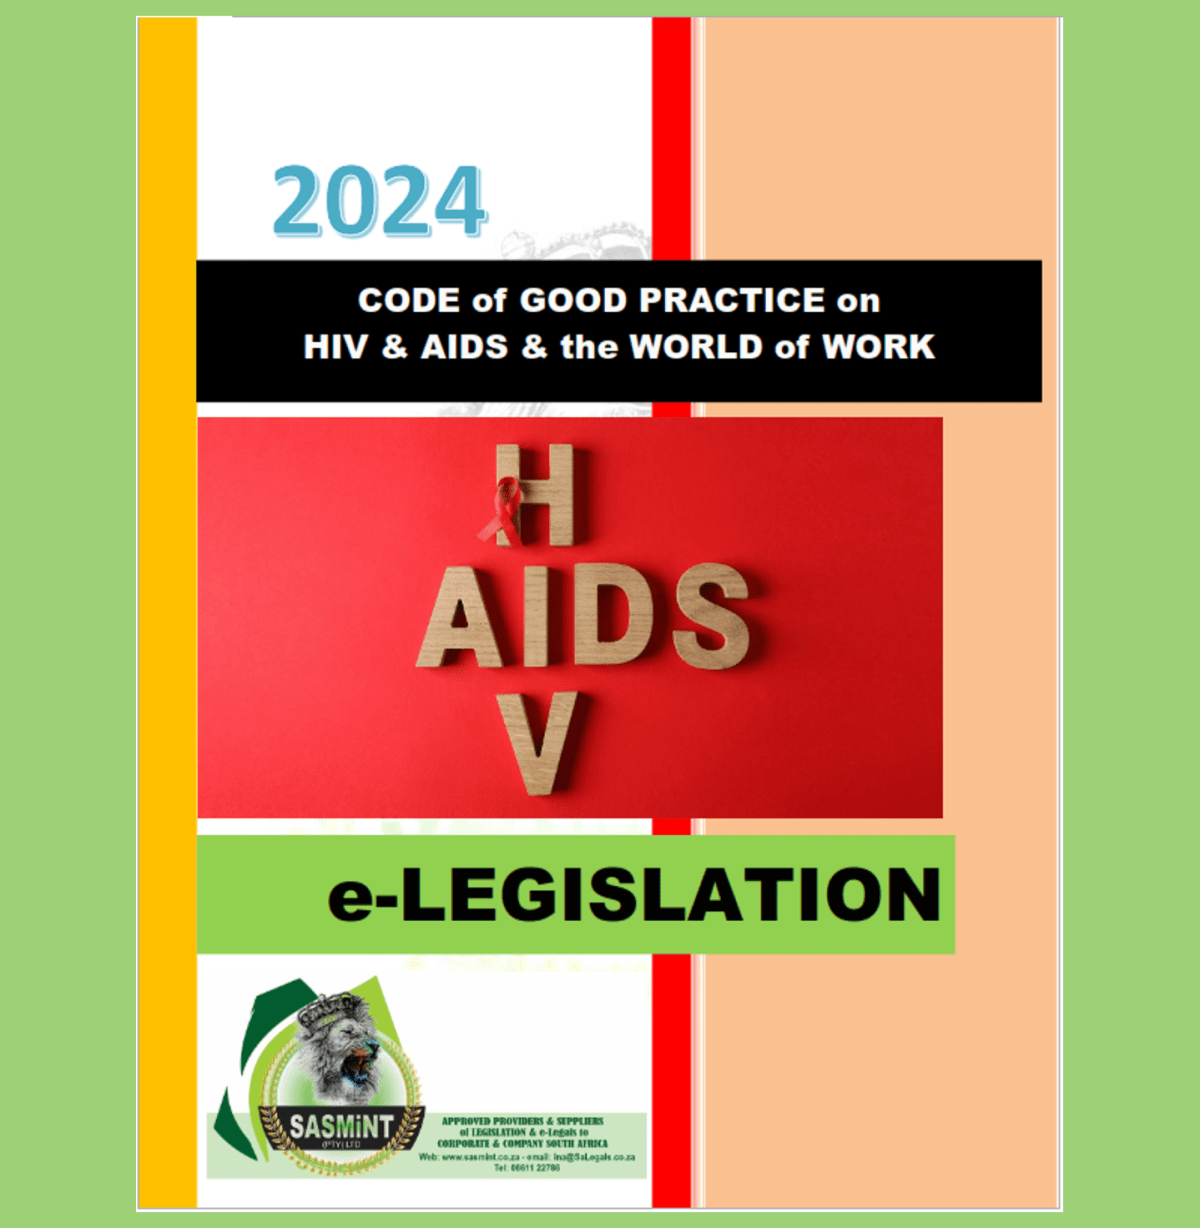 CODE OF GOOD PRACTICE ON HIV AND AIDS AND THE WORLD OF WORK